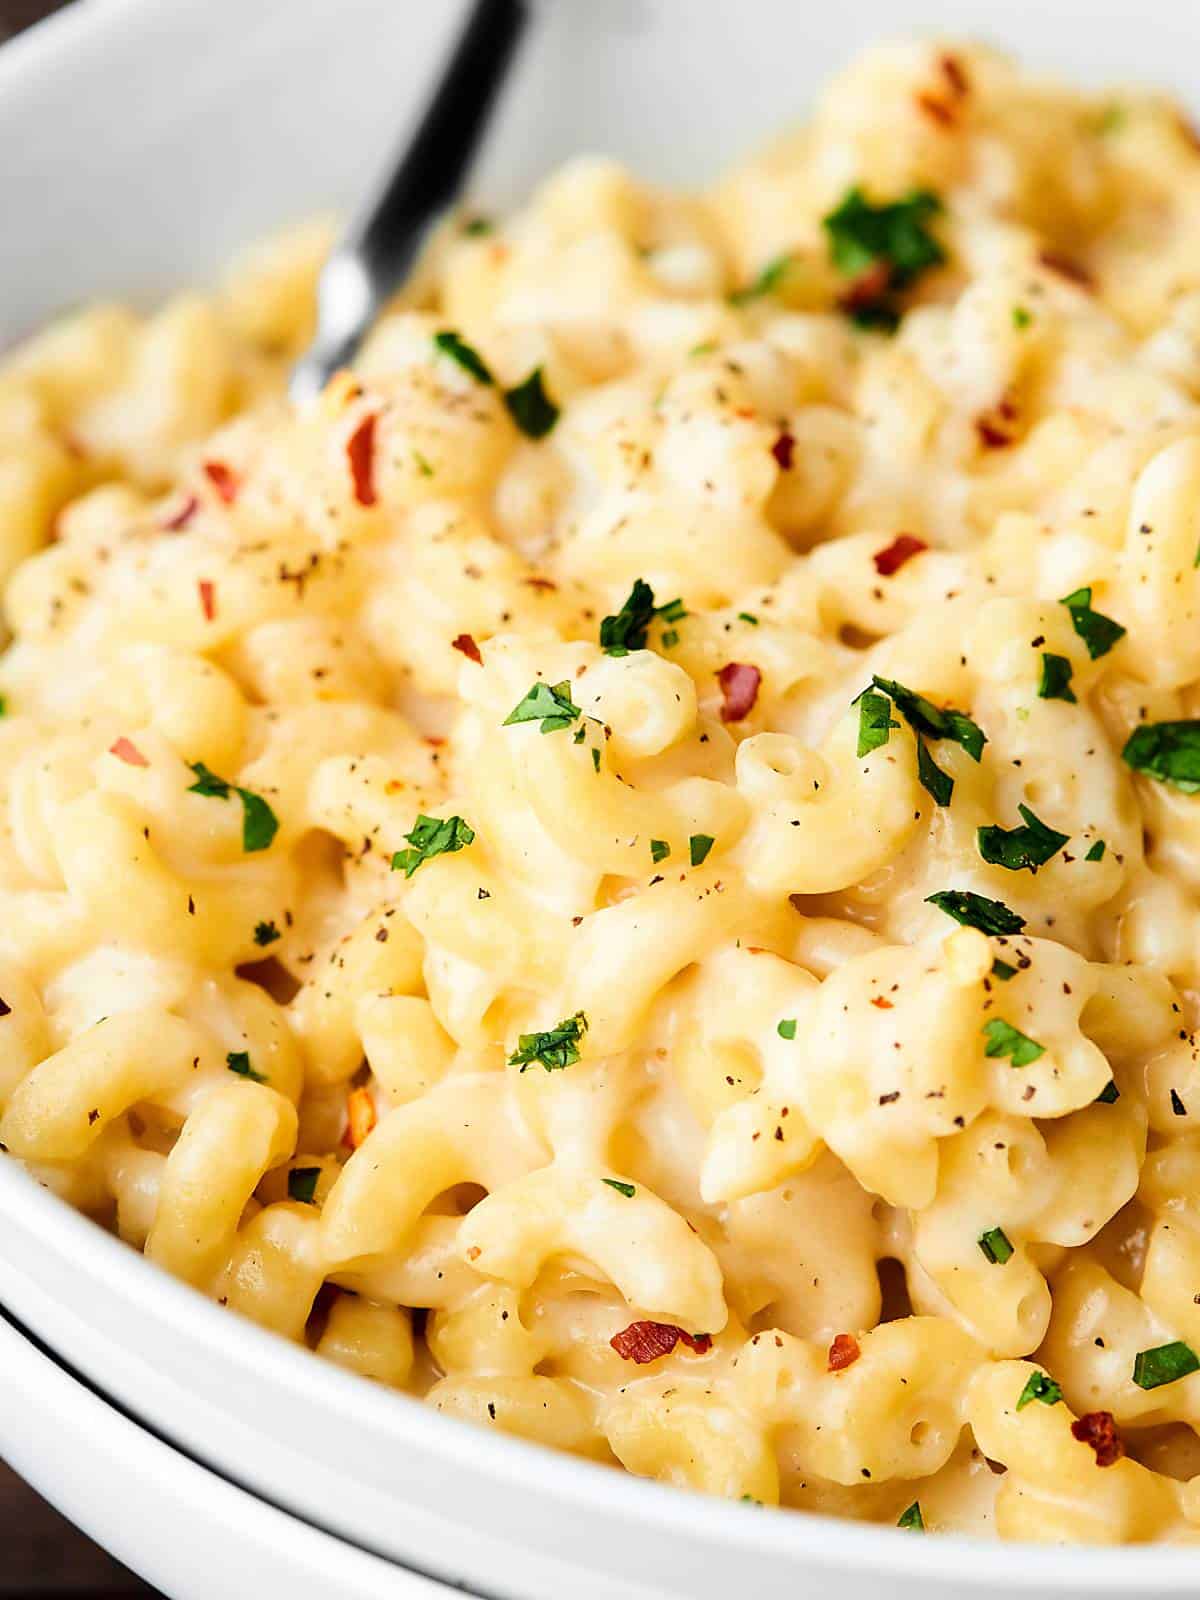 Five Ingredient Mac and Cheese Recipe - One Pot Wonder!